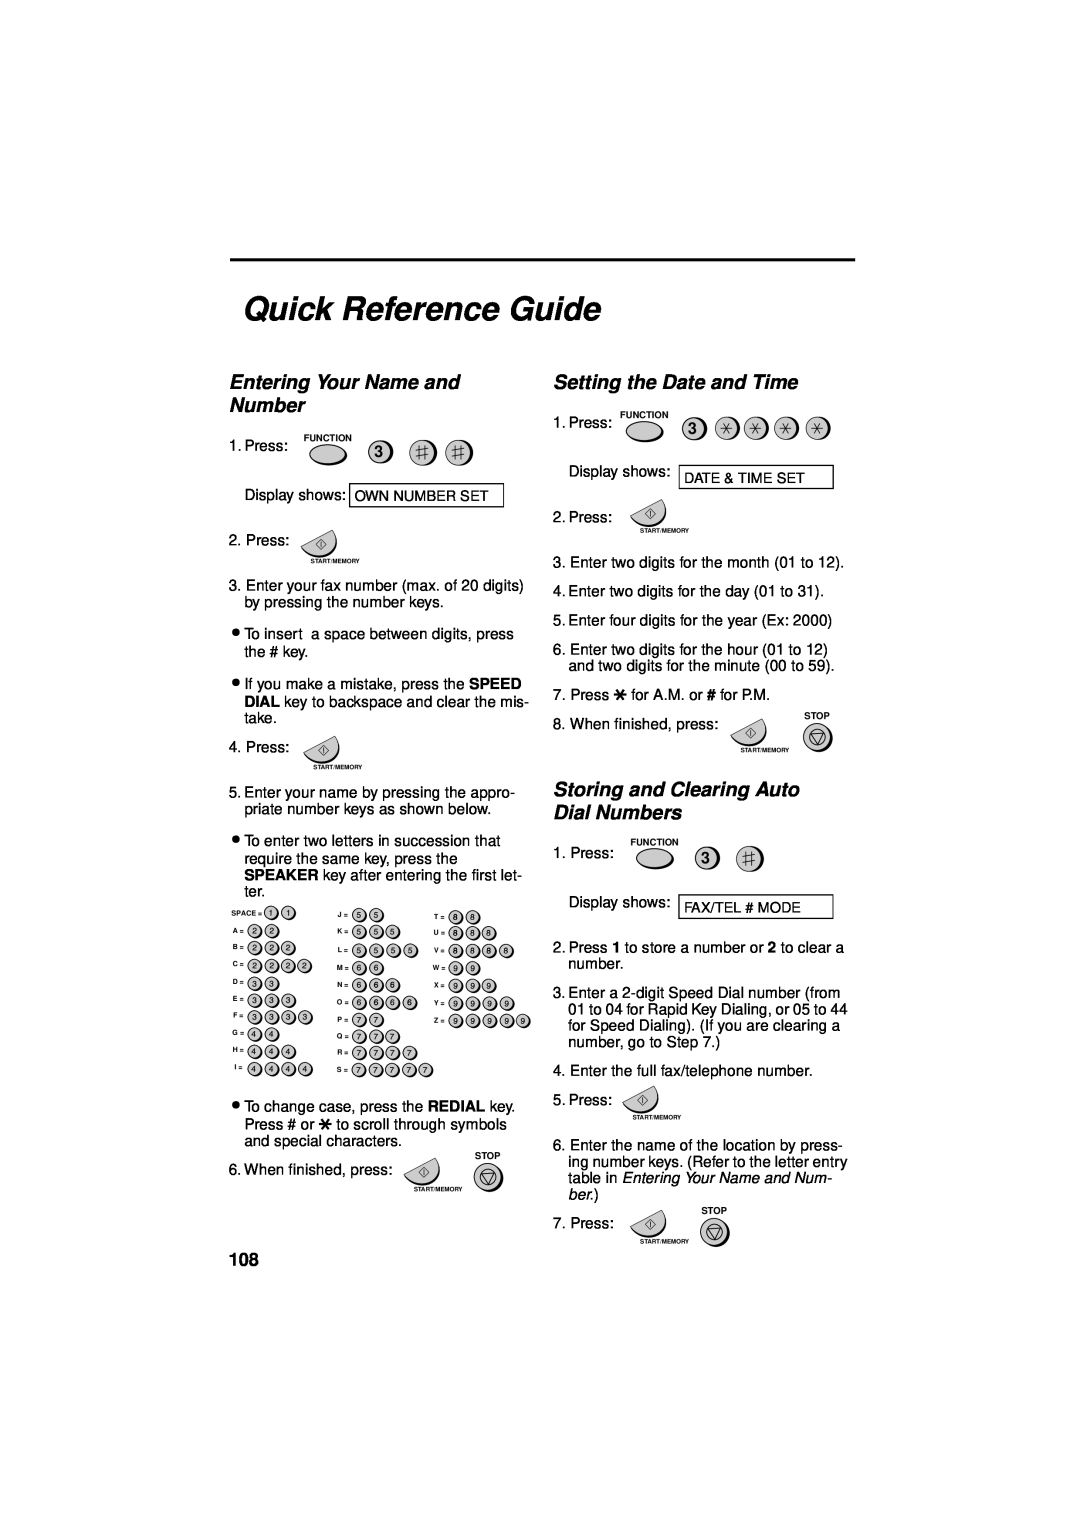 Sharp UX-340LM manual Quick Reference Guide, Entering Your Name and Number, Setting the Date and Time, Press 